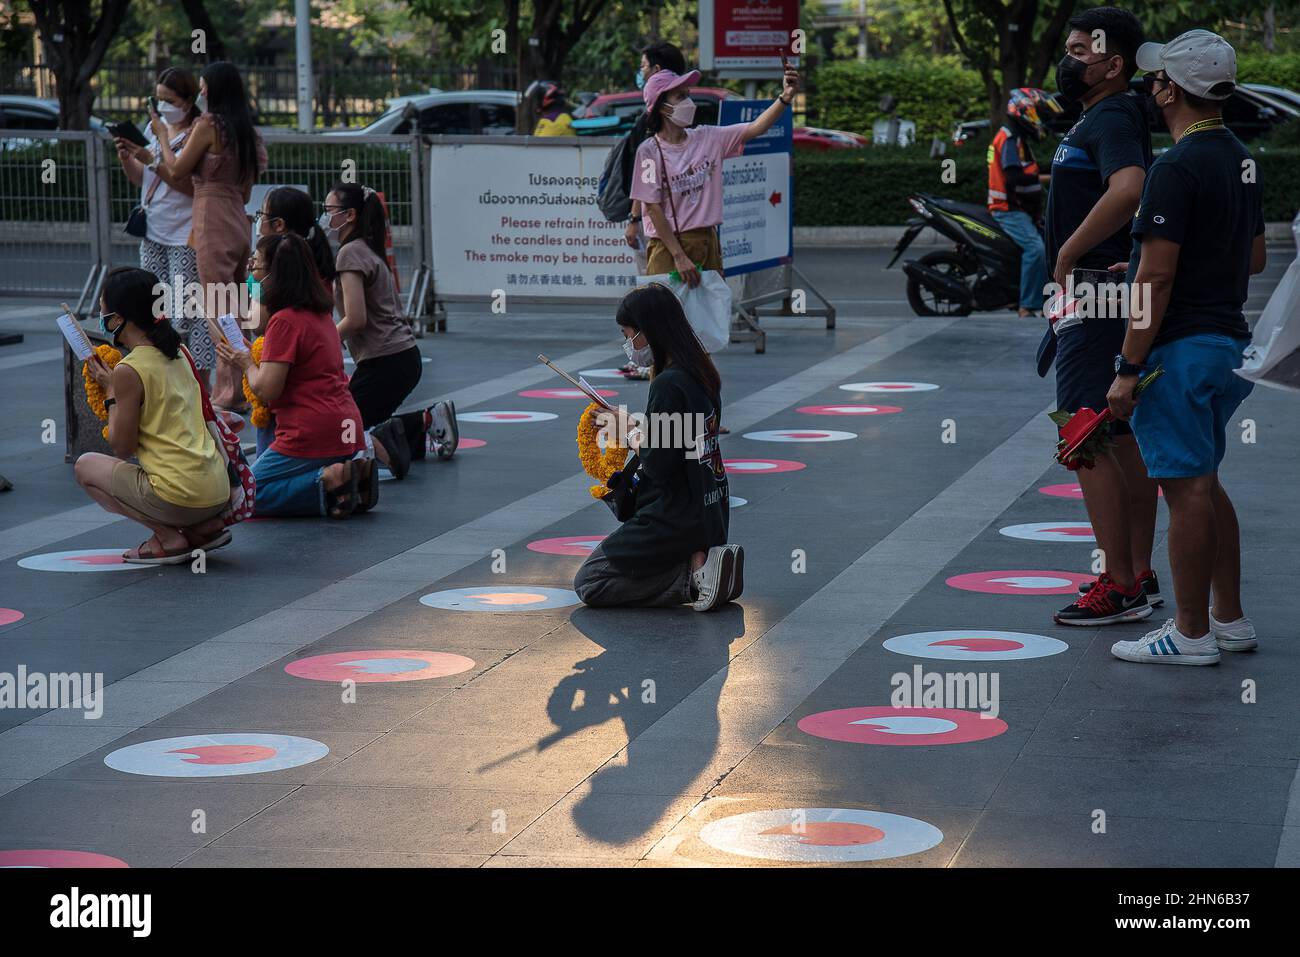 People are seen praying at the Trimuriti shrine in Bangkok. The 'Pray and swipe right' event organized by online dating app Tinder, with Social distancing Tinder logo markers on the praying ground, a photo booth where people can take profile pictures for their new accounts, and free offering sets, at the Trimuriti shrine on Valentine's day in Bangkok, Thailand. The Trimuriti one of the Hindu gods is known to be the god of love. People come to worship at the Trimurti shrine with offerings of red roses in the hope that they will meet their soulmate. (Photo by Peerapon Boonyakiat/SOPA Images/Si Stock Photo